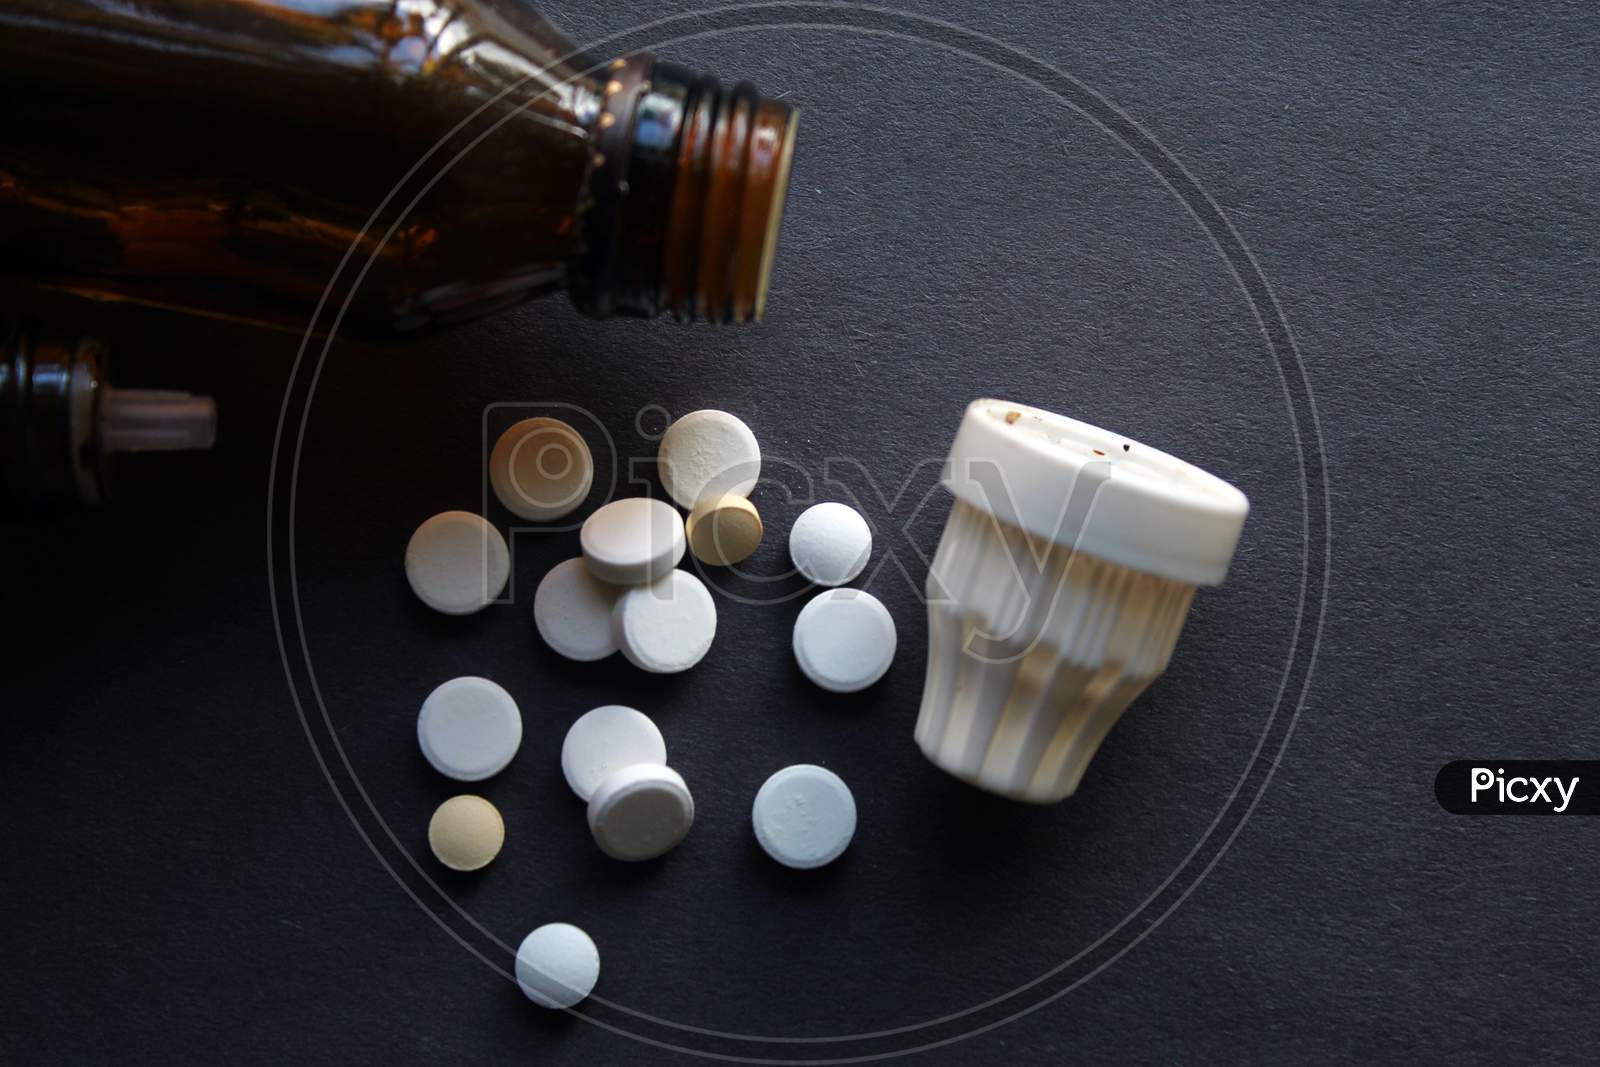 Tablets, pills, medicines and containers display together as medical and pharmacy theme background, selective focus.